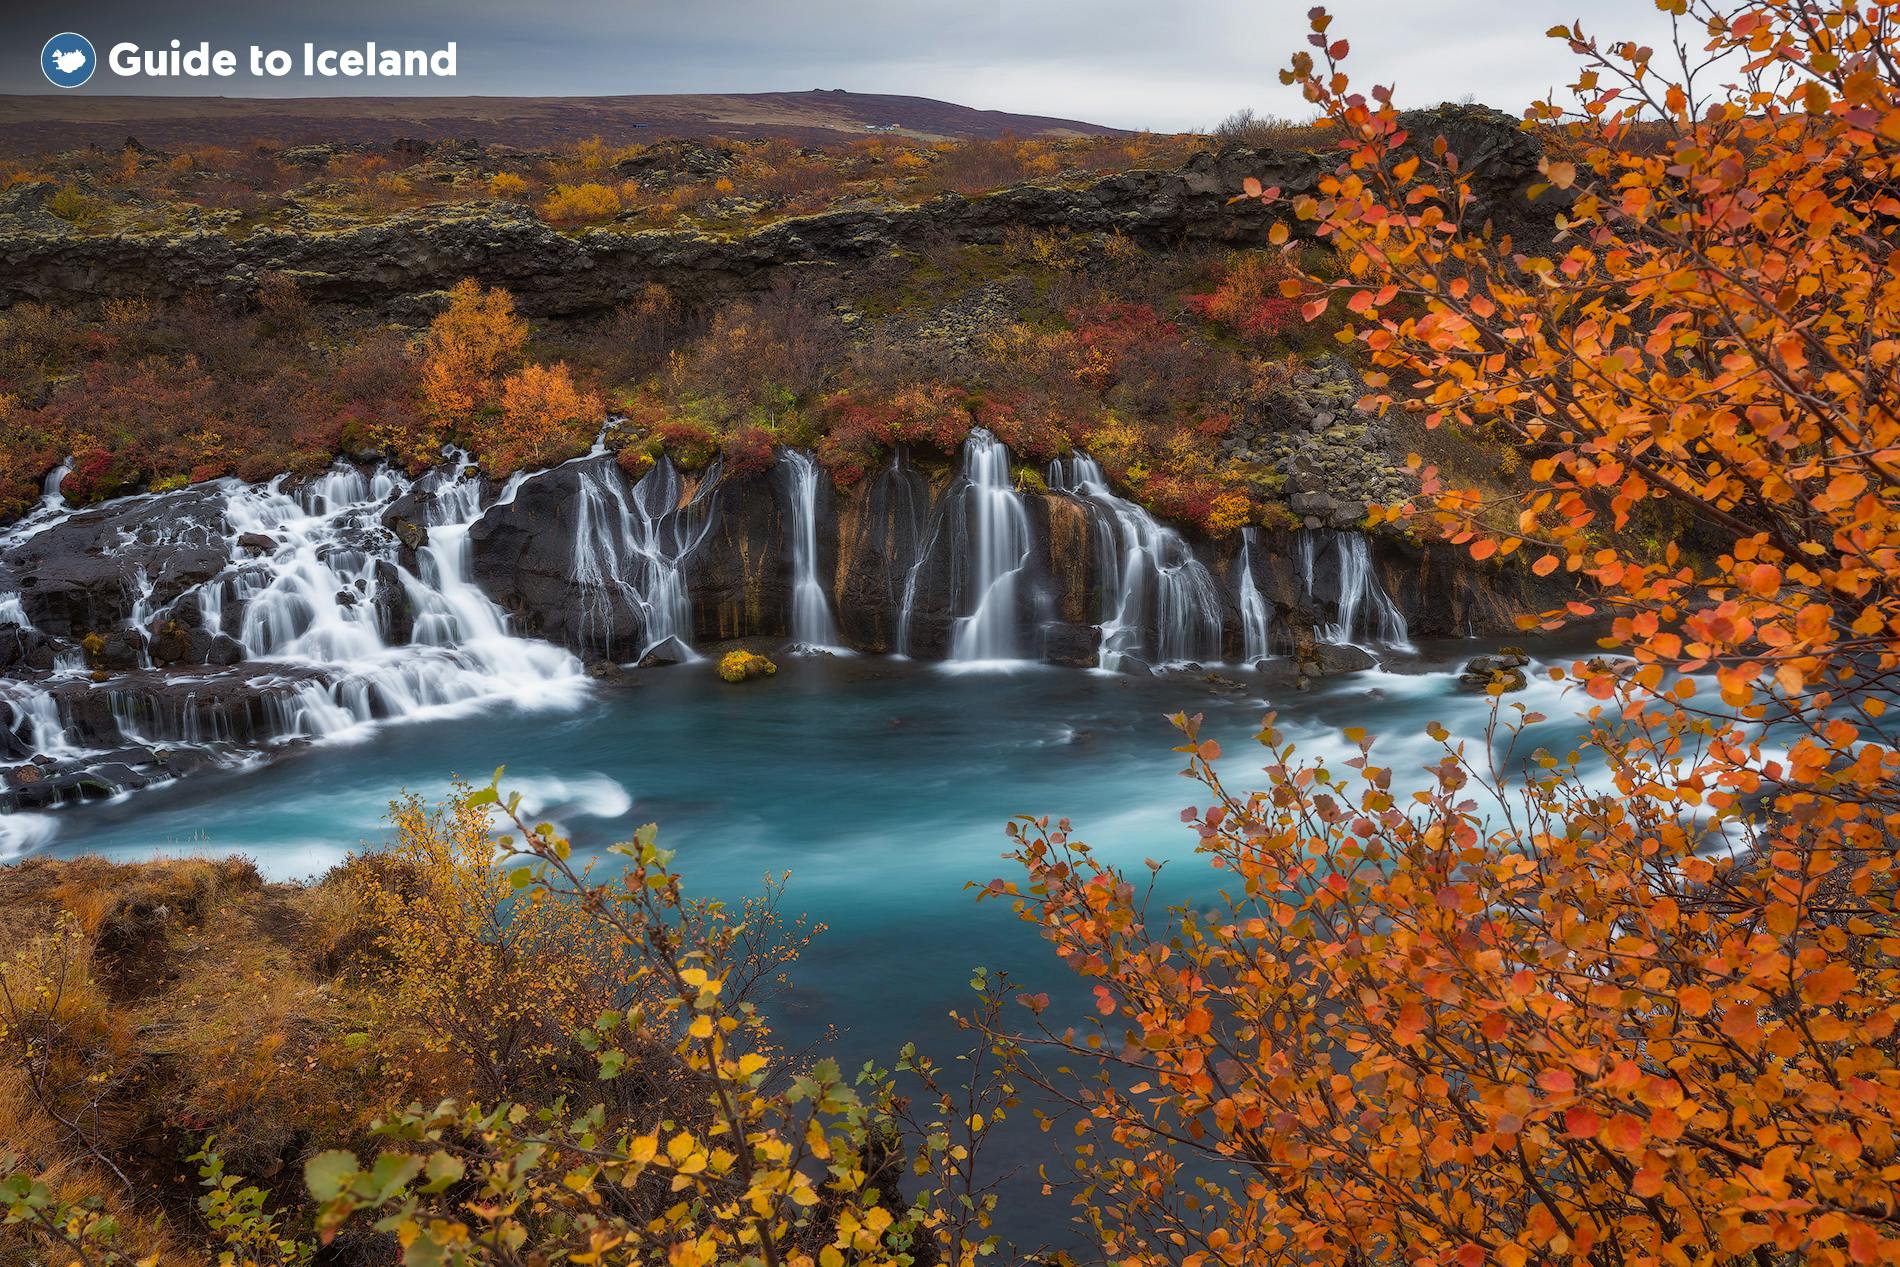 The Hraunfossar series of waterfalls can be found nearby to both Reykholt and the sprawling church estate of Húsafell.